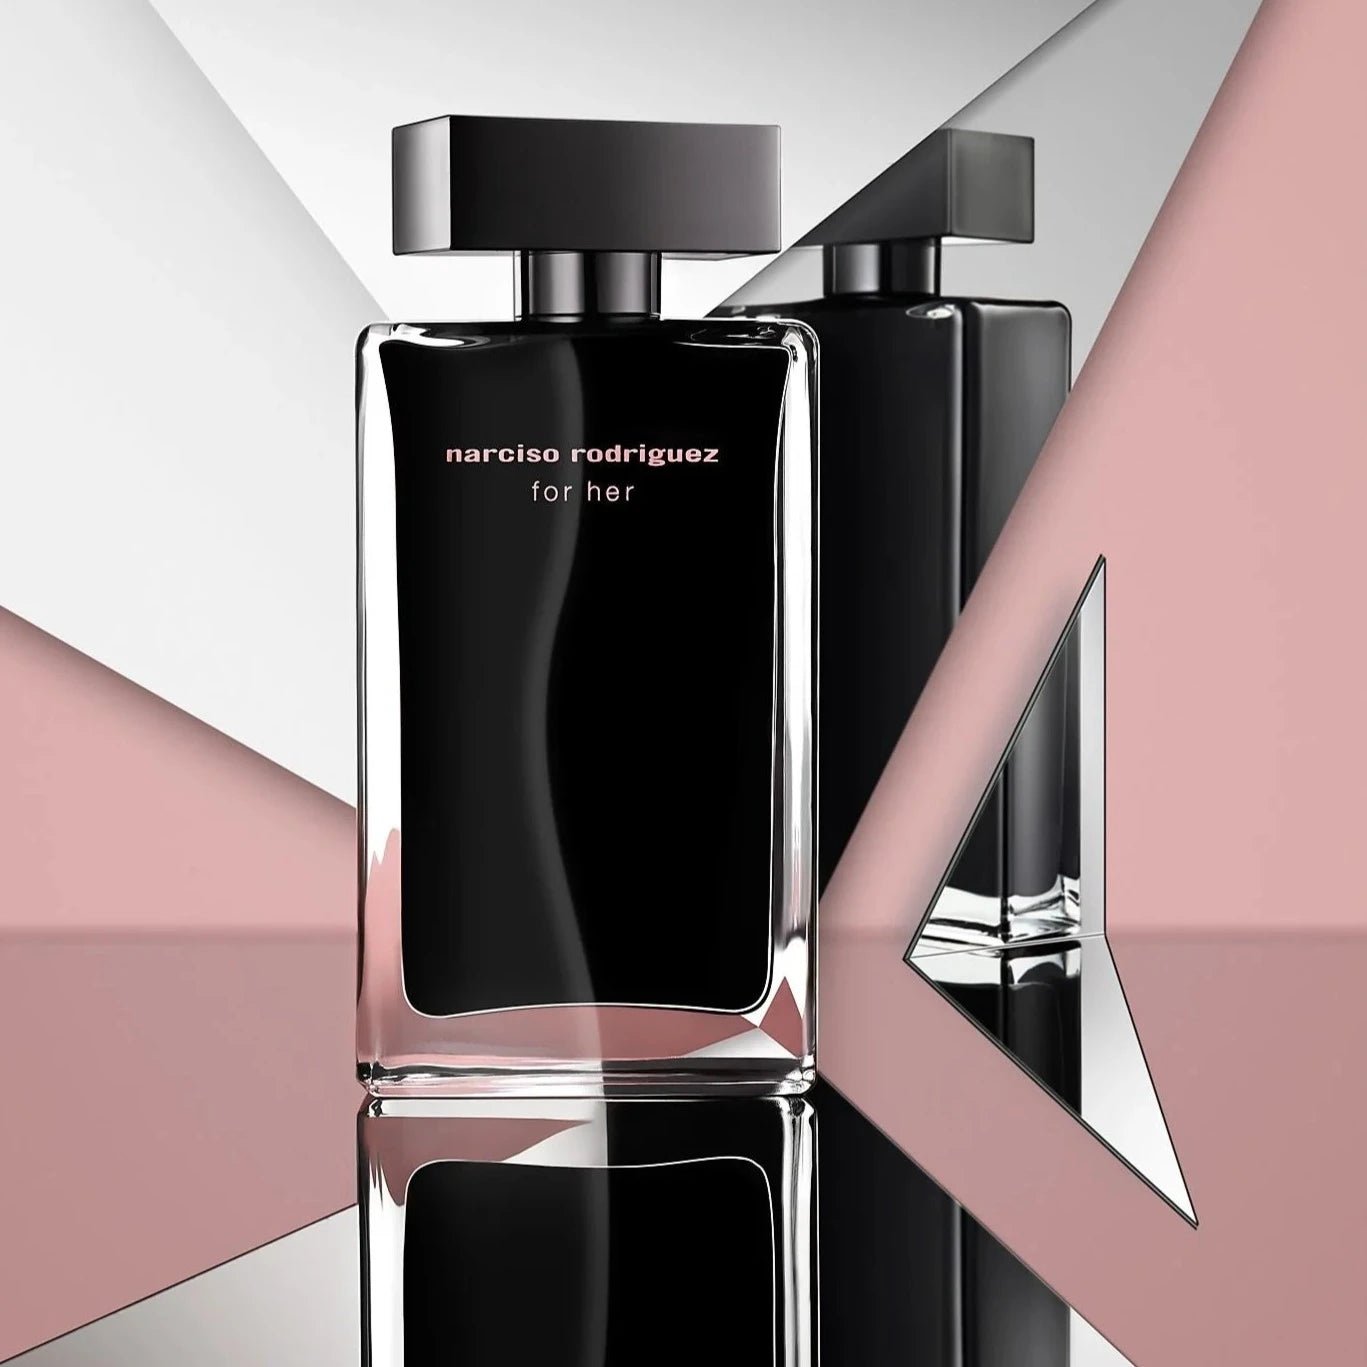 Narciso Rodriguez For Her EDT Trio Collection | My Perfume Shop Australia